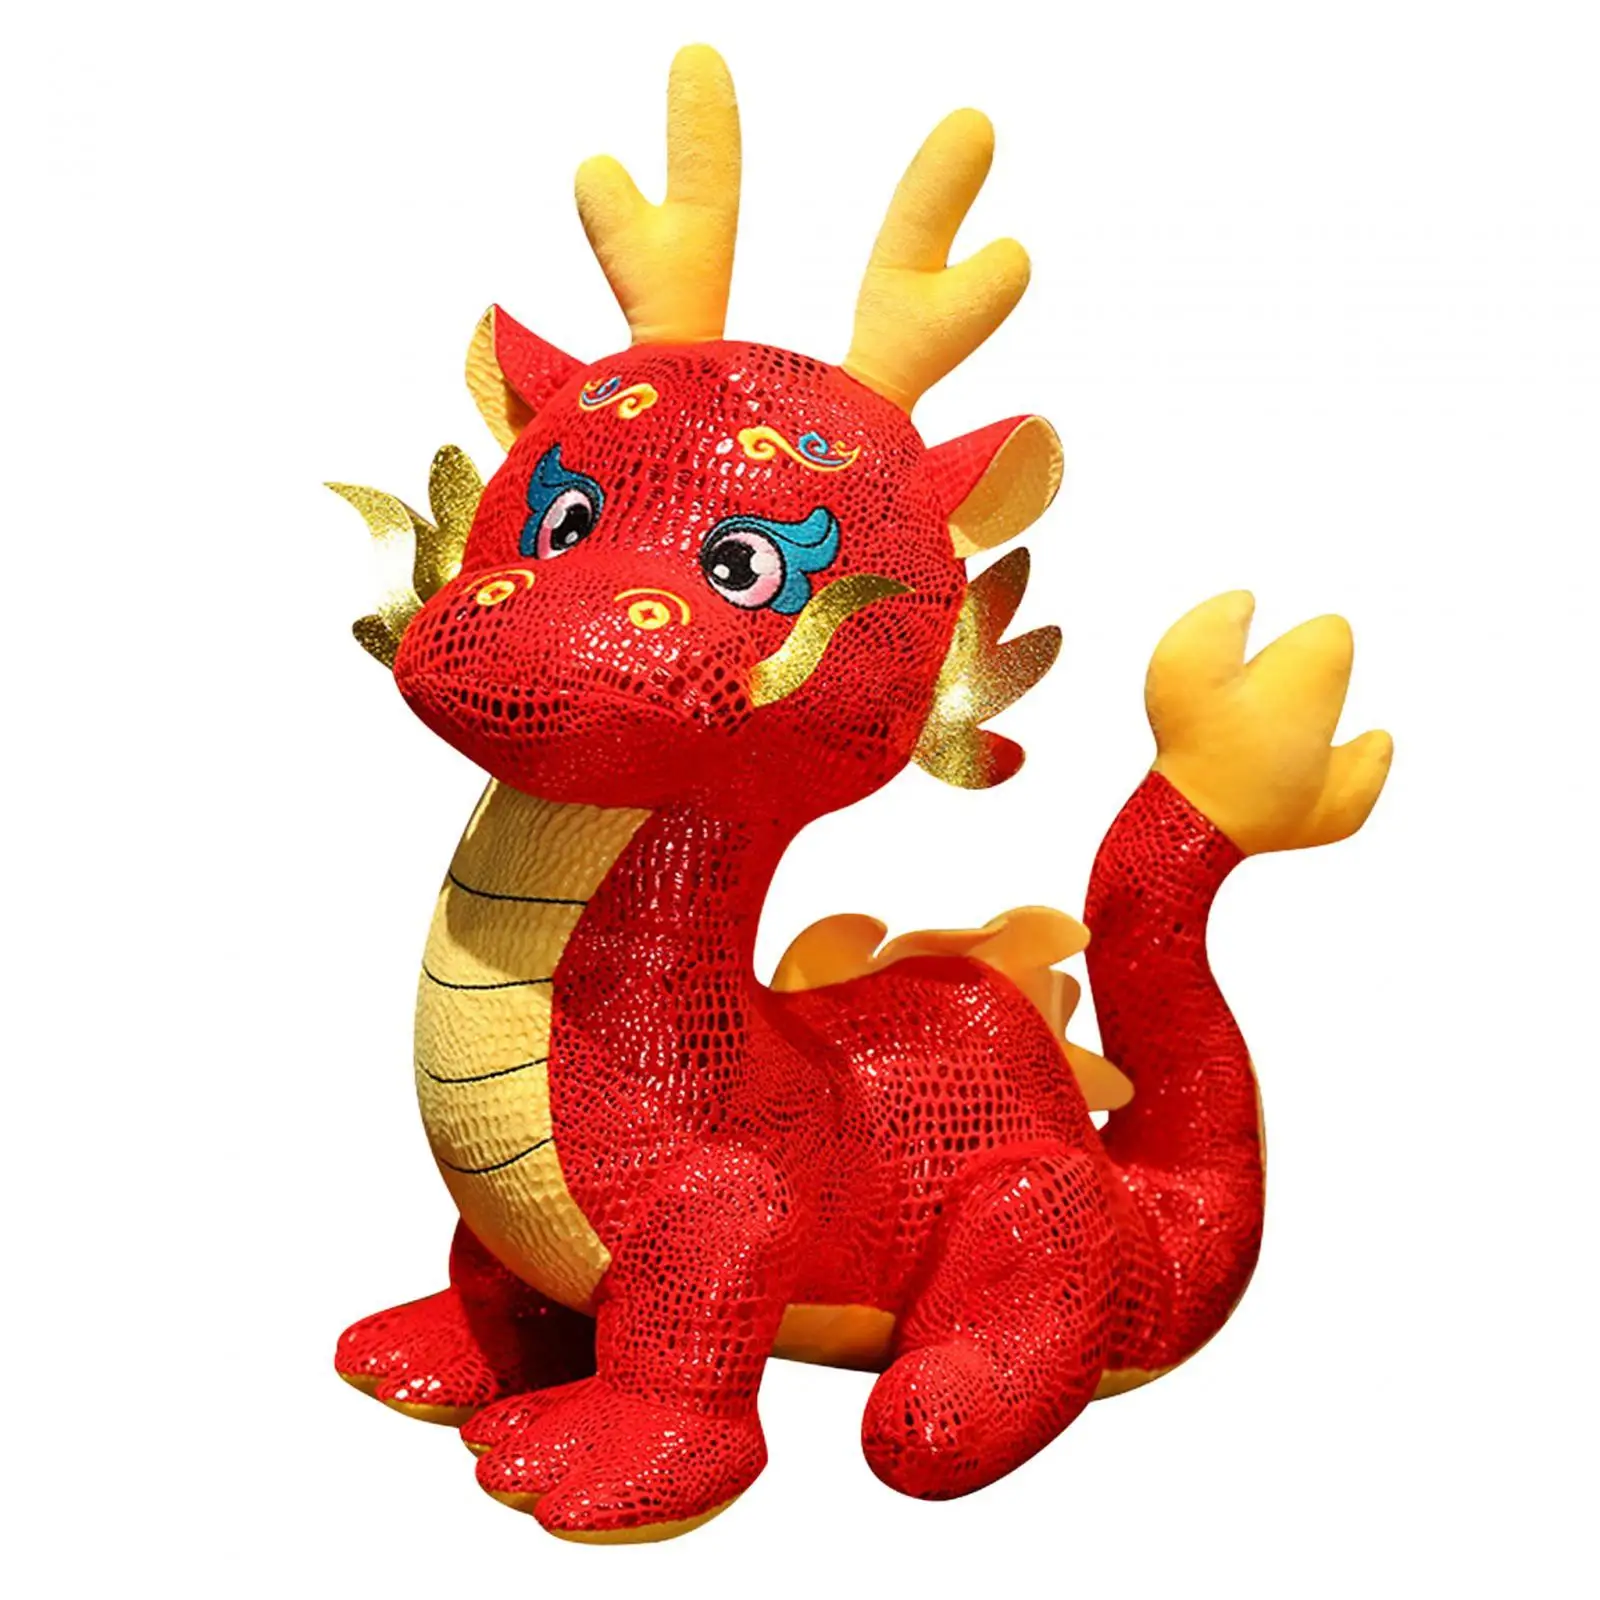 Chinese Dragon Plush Toy New Year Stuffed Dragon Animal Doll Cute Throw Pillow for Party Bedroom Living Room Holiday Decoration